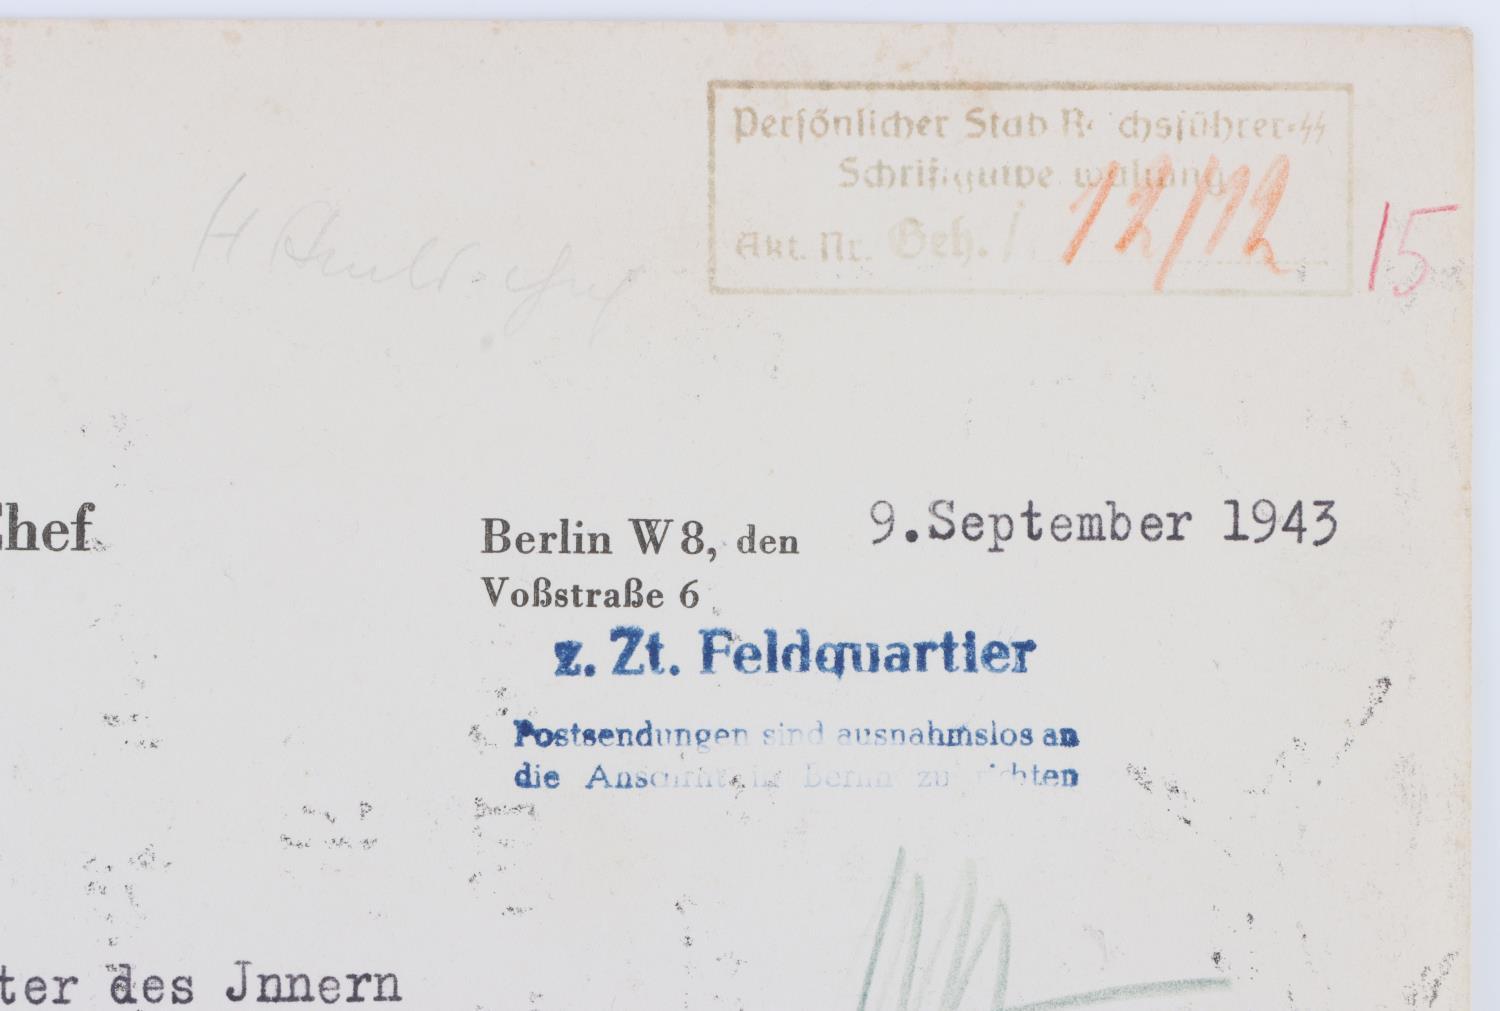 WWII GERMAN CHANCELLORY HIMMLER SIGNED DOCUMENT